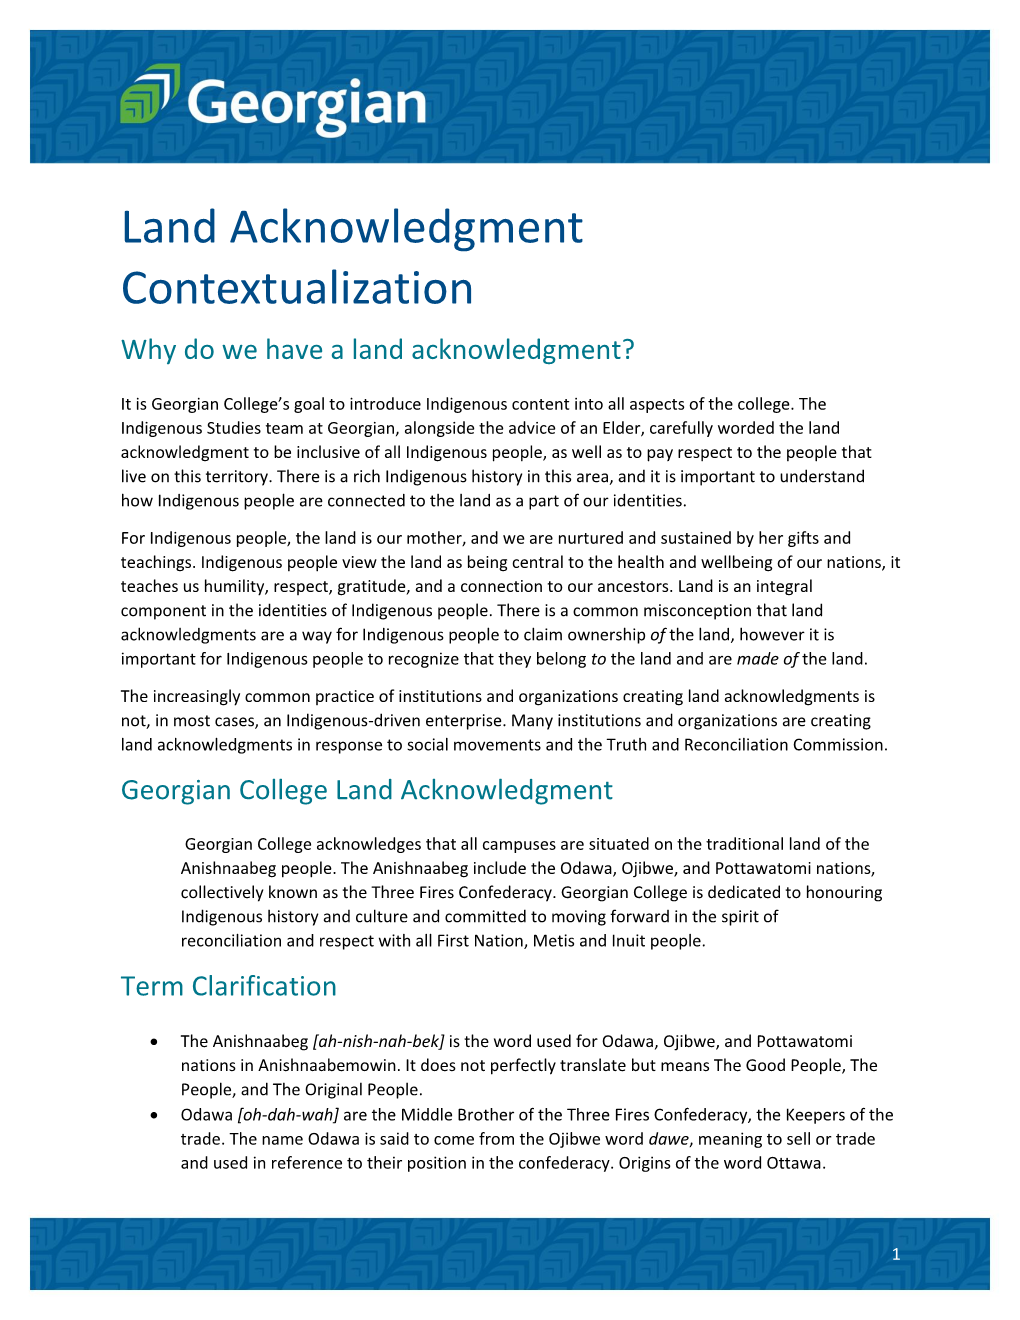 Land Acknowledgment Contextualization Why Do We Have a Land Acknowledgment?